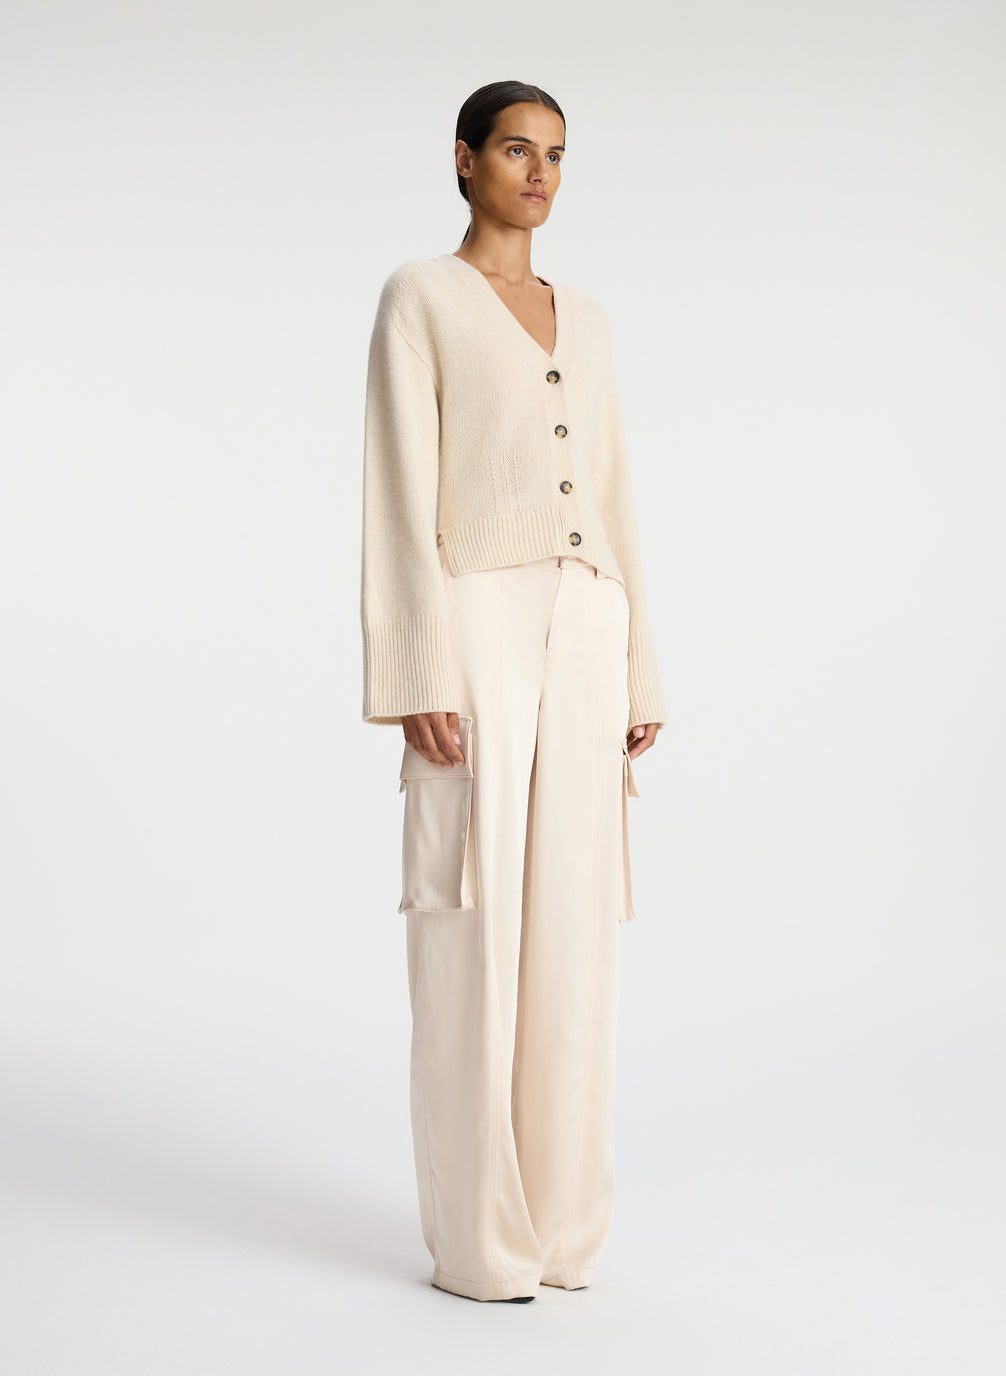 side view of woman wearing cream cardigan and off white satin cargo pants